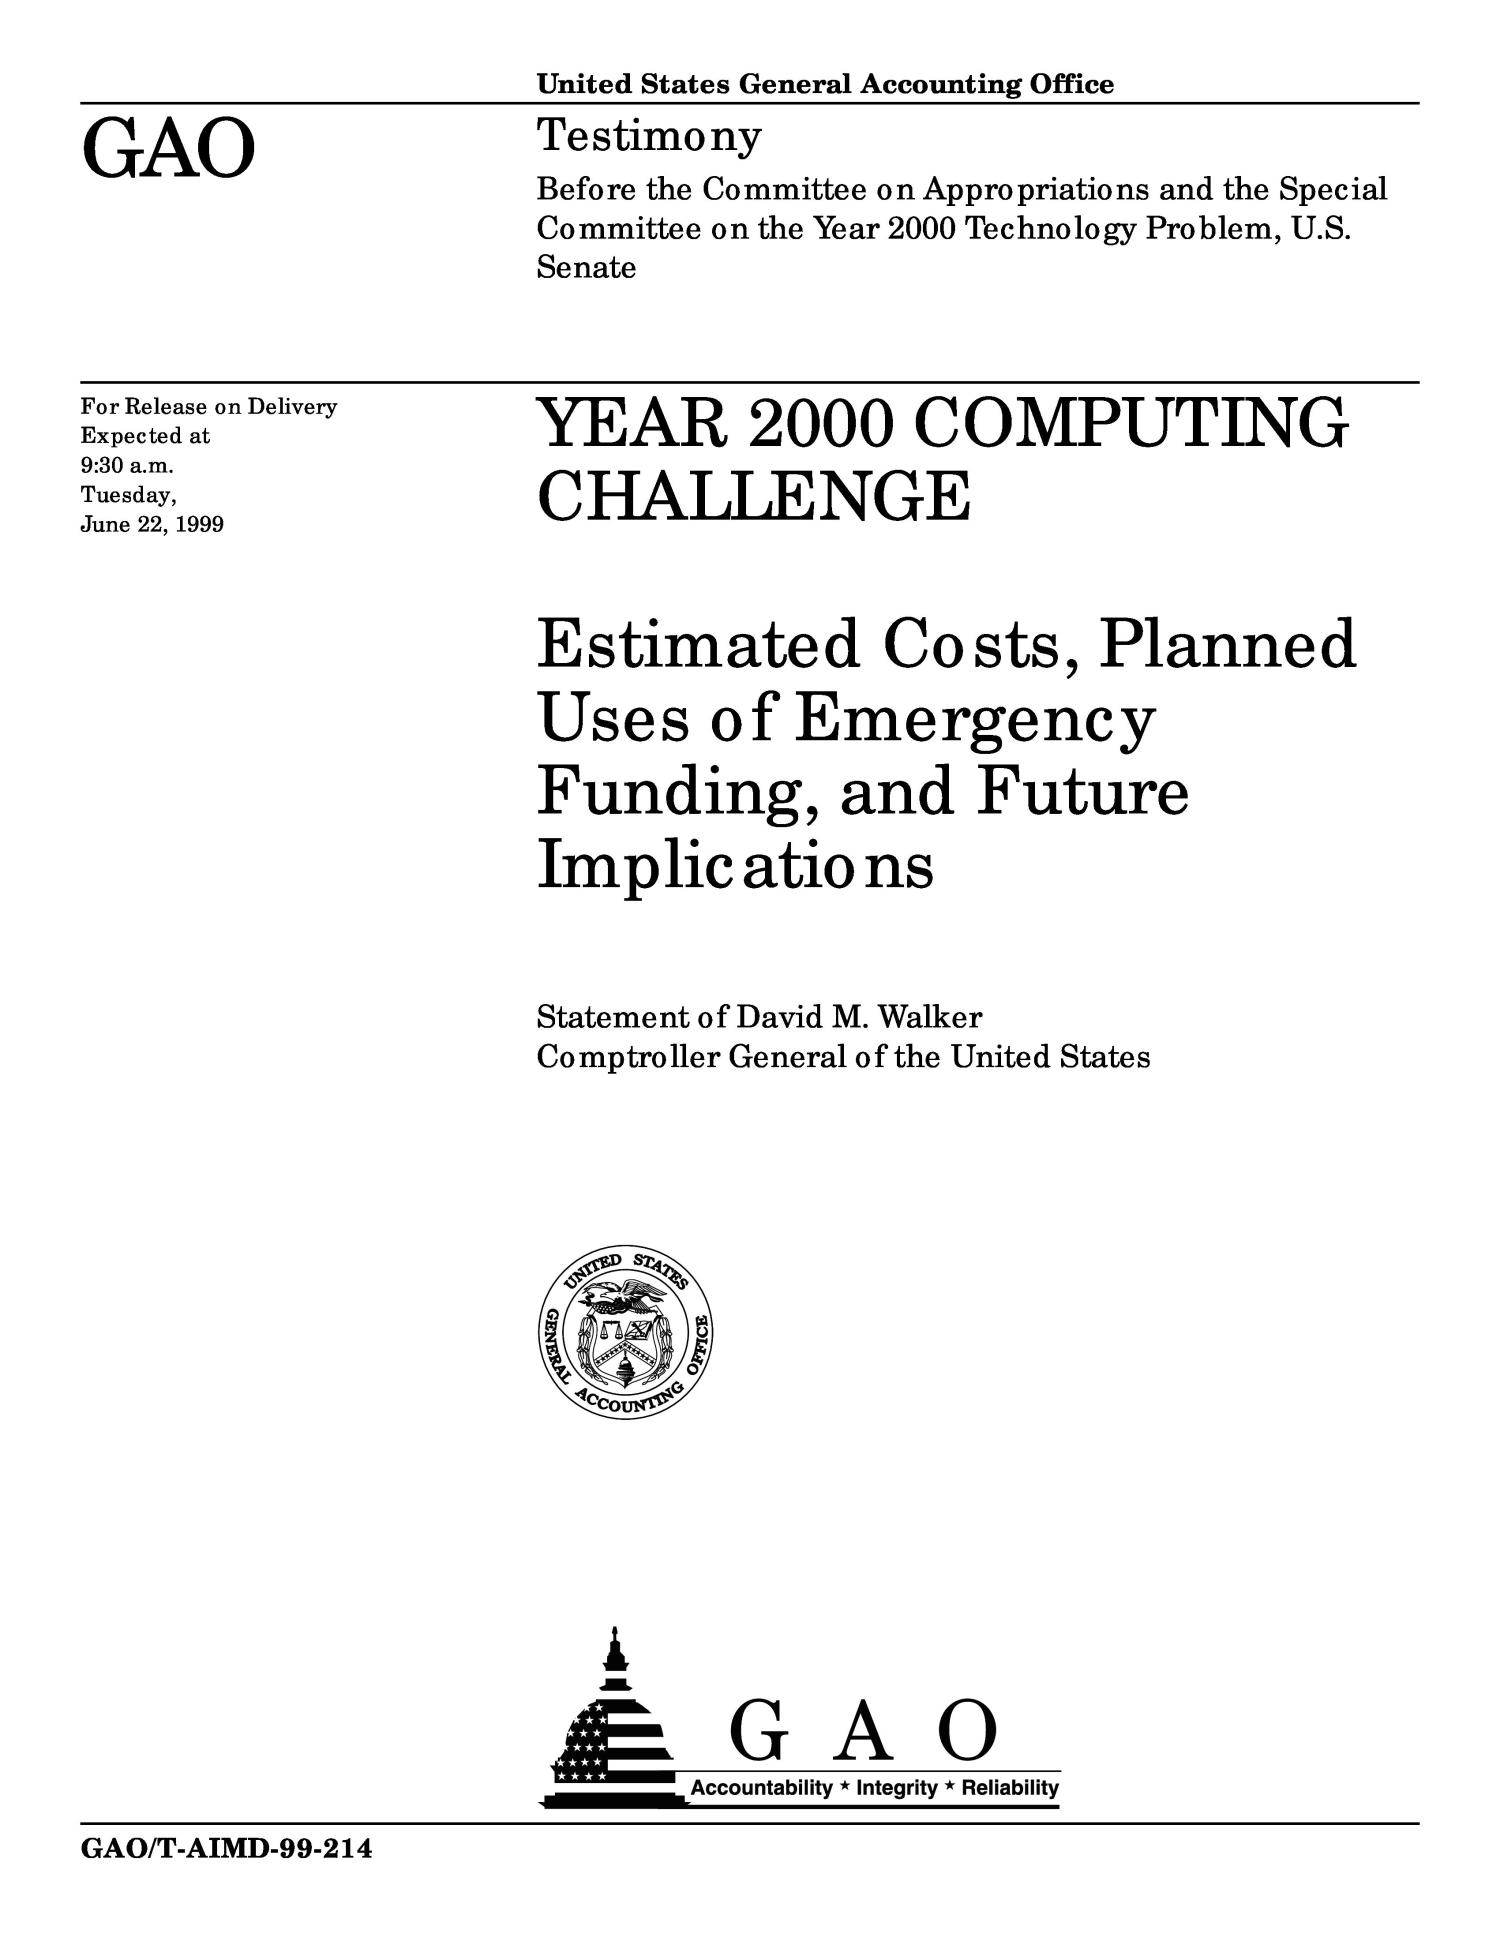 Year 2000 Computing Challenge: Estimated Costs, Planned Uses of Emergency Funding, and Future Implications
                                                
                                                    [Sequence #]: 1 of 27
                                                